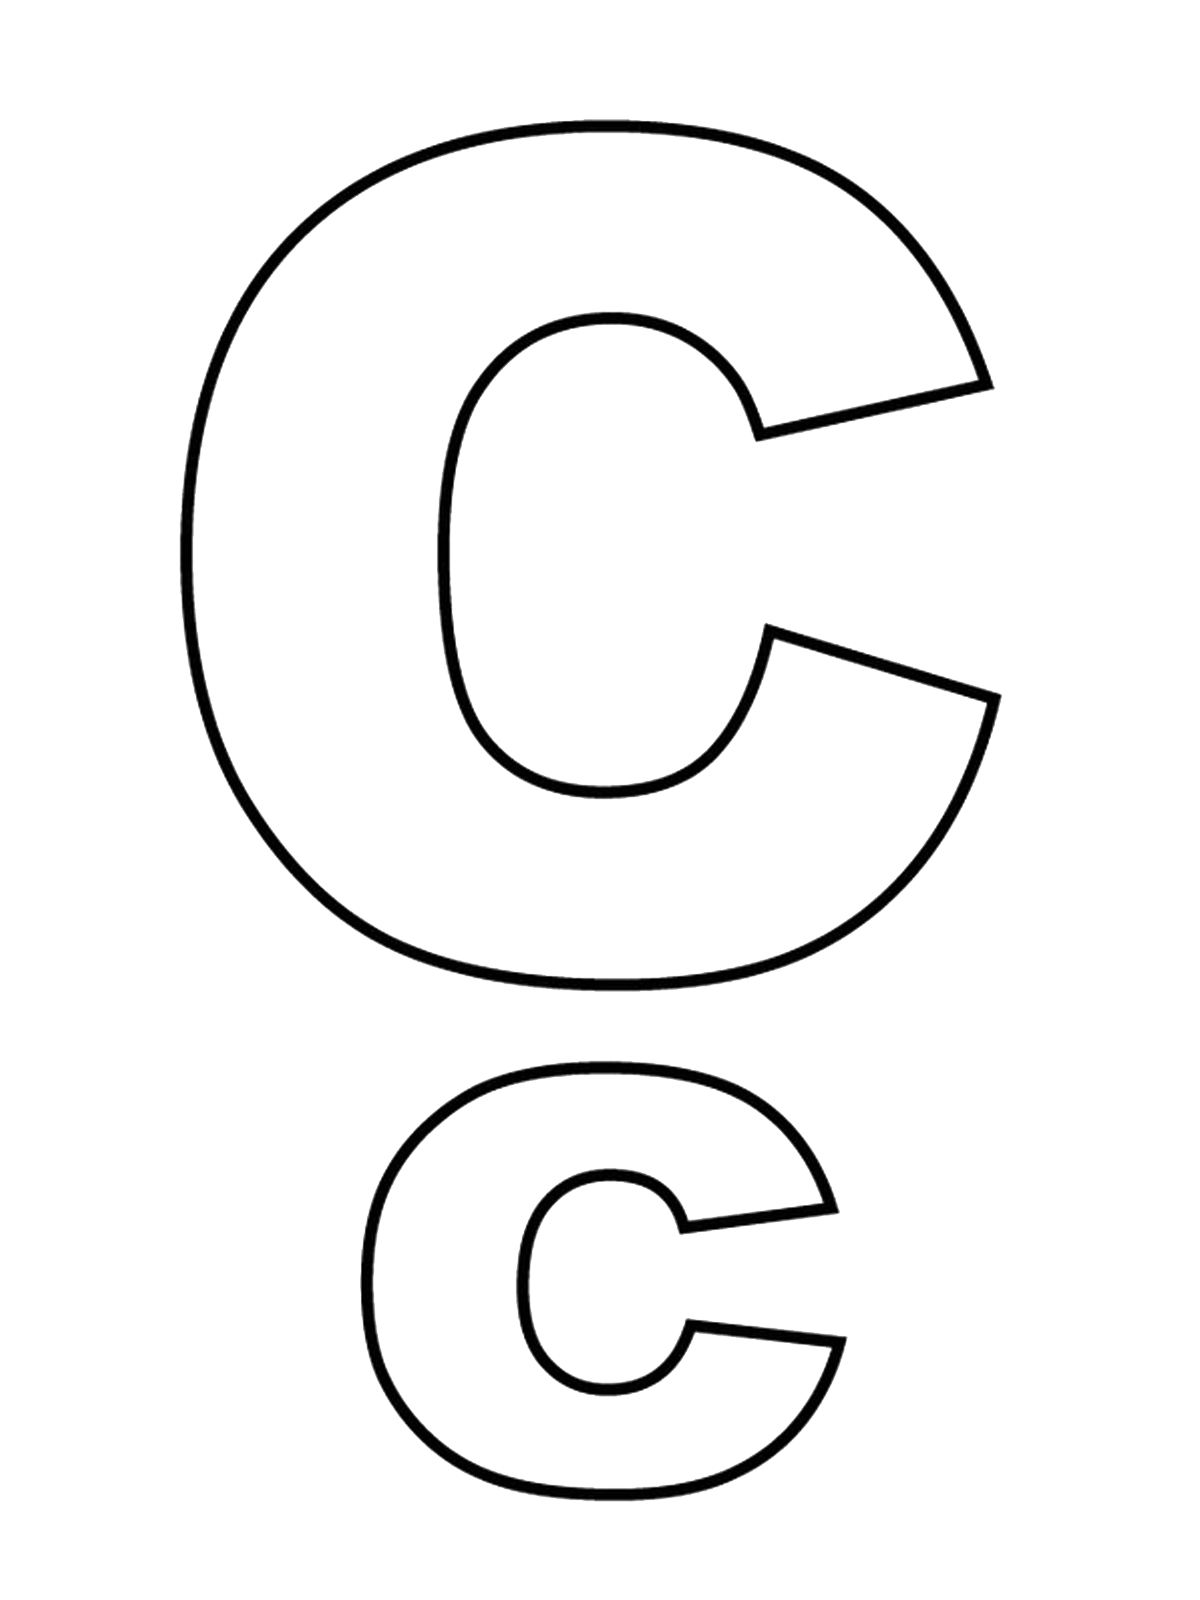 Letters and numbers - Letter C capital letters and lowercase